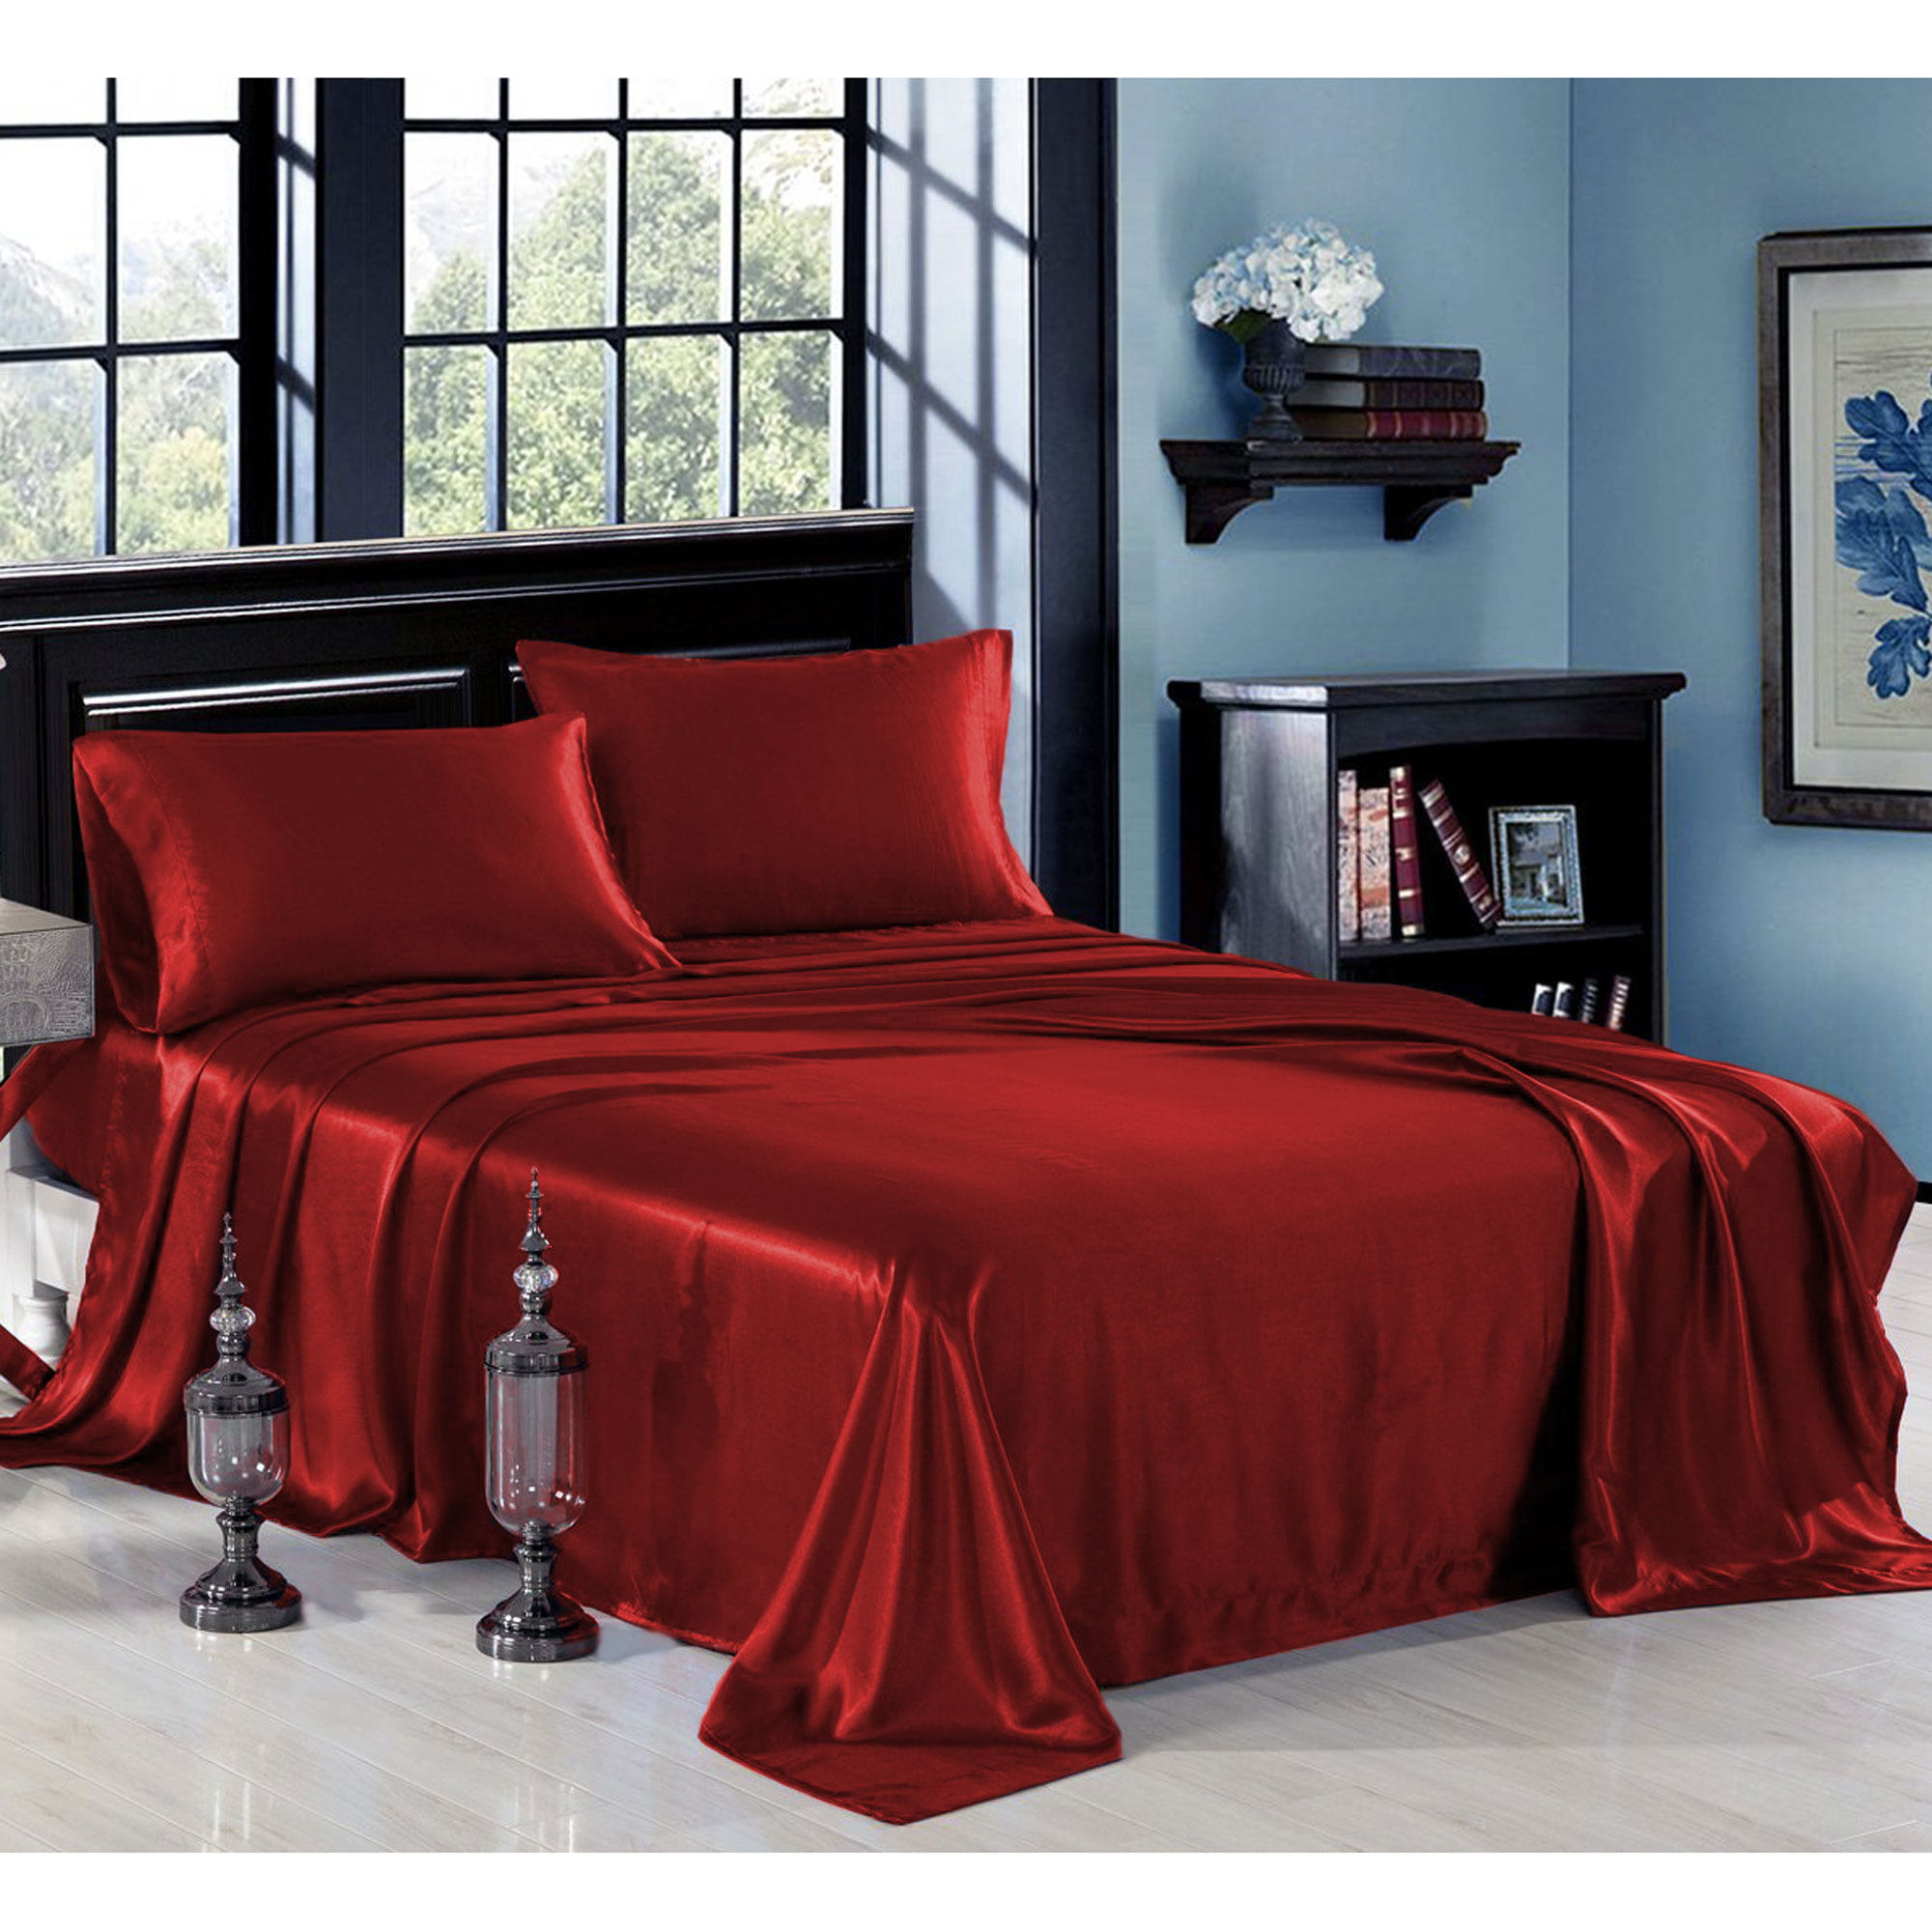 Ultra Soft Silky Satin Bed Sheet Set with Pillowcase (3 or 4Piece)